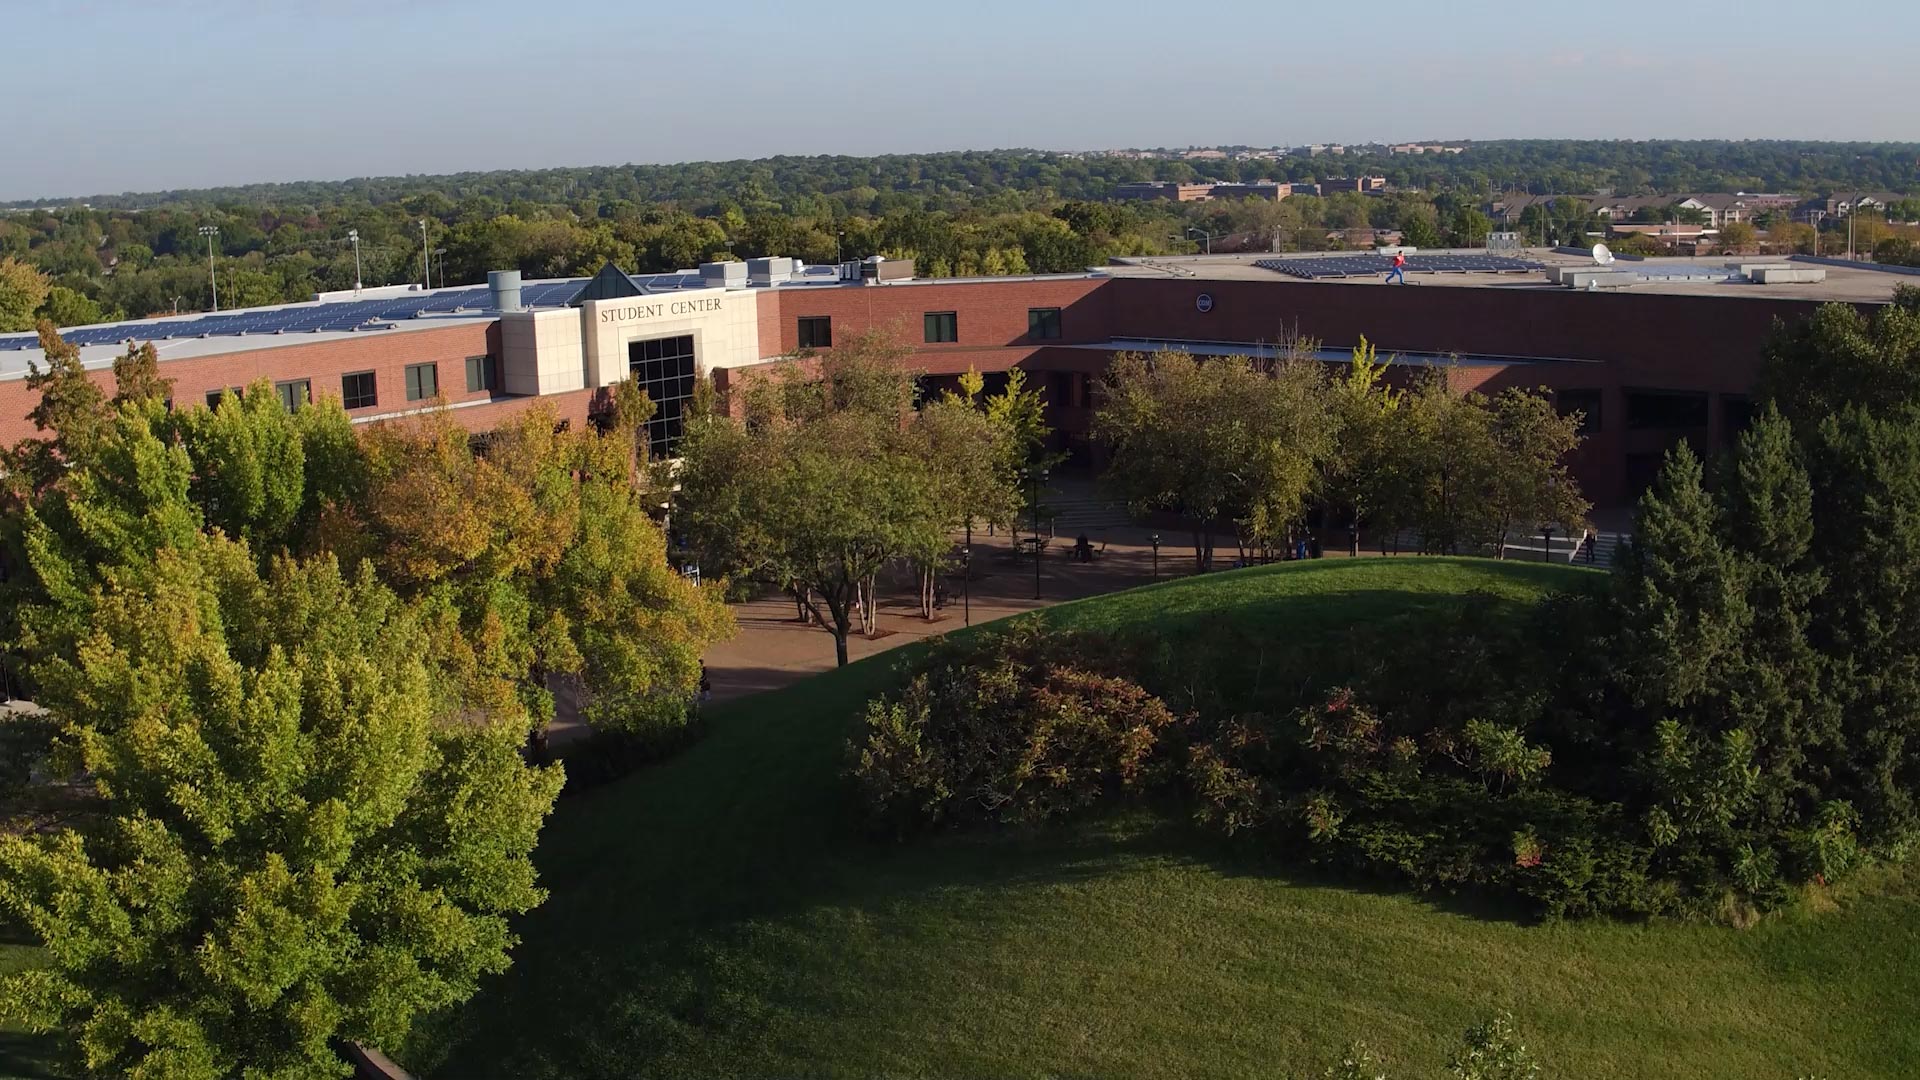 Drone view of the Student Center